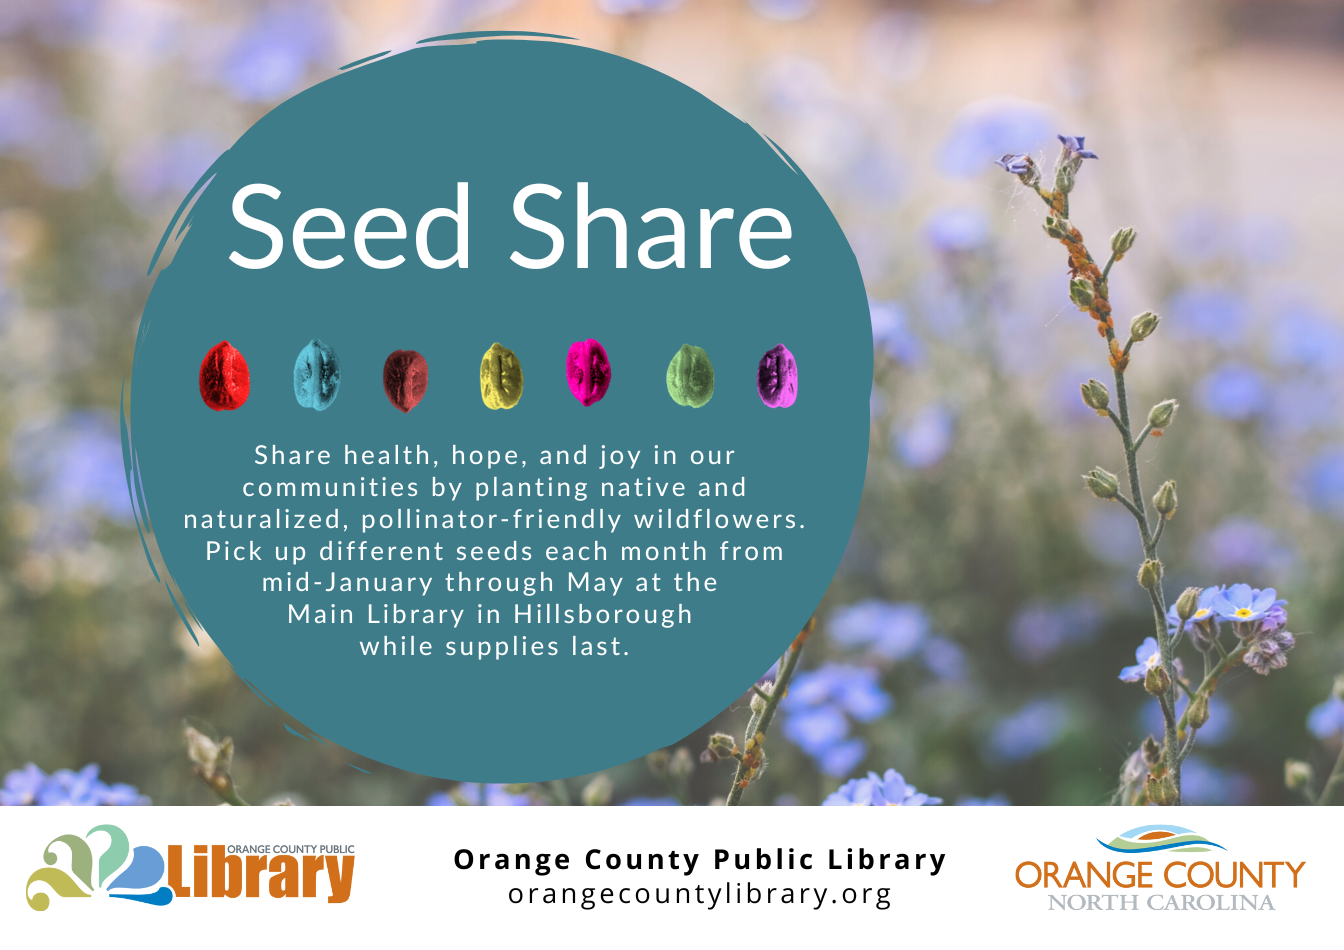 Share health, hope, and joy throughout our communities by planting pollinator-friendly wildflowers that are native or naturalized to our area. Seed packs with information and instructions will available on the 2nd floor of the Main Library in Hillsborough. A different plant will be featured each month from January through May. This month's plant seeds are: Scarlet Beebalm (Monarda didyma). Seeds will be available all month while supply lasts.